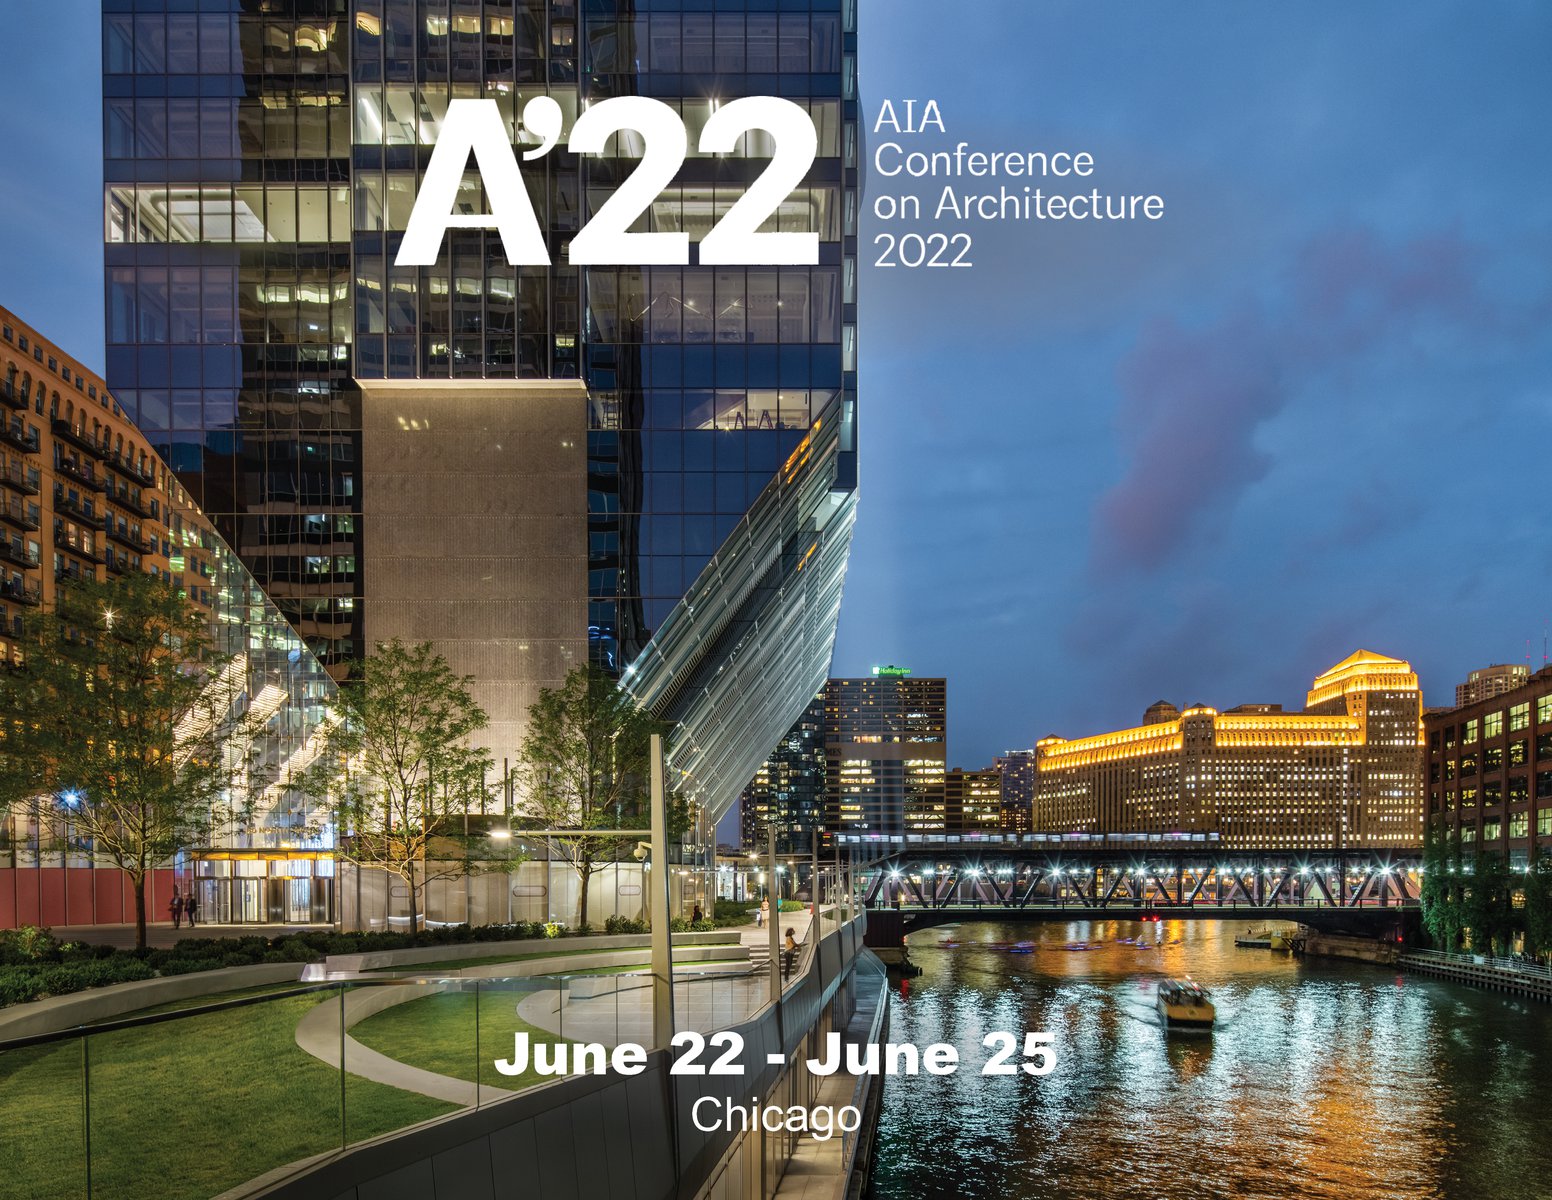 GP at the National AIA Conference on Architecture